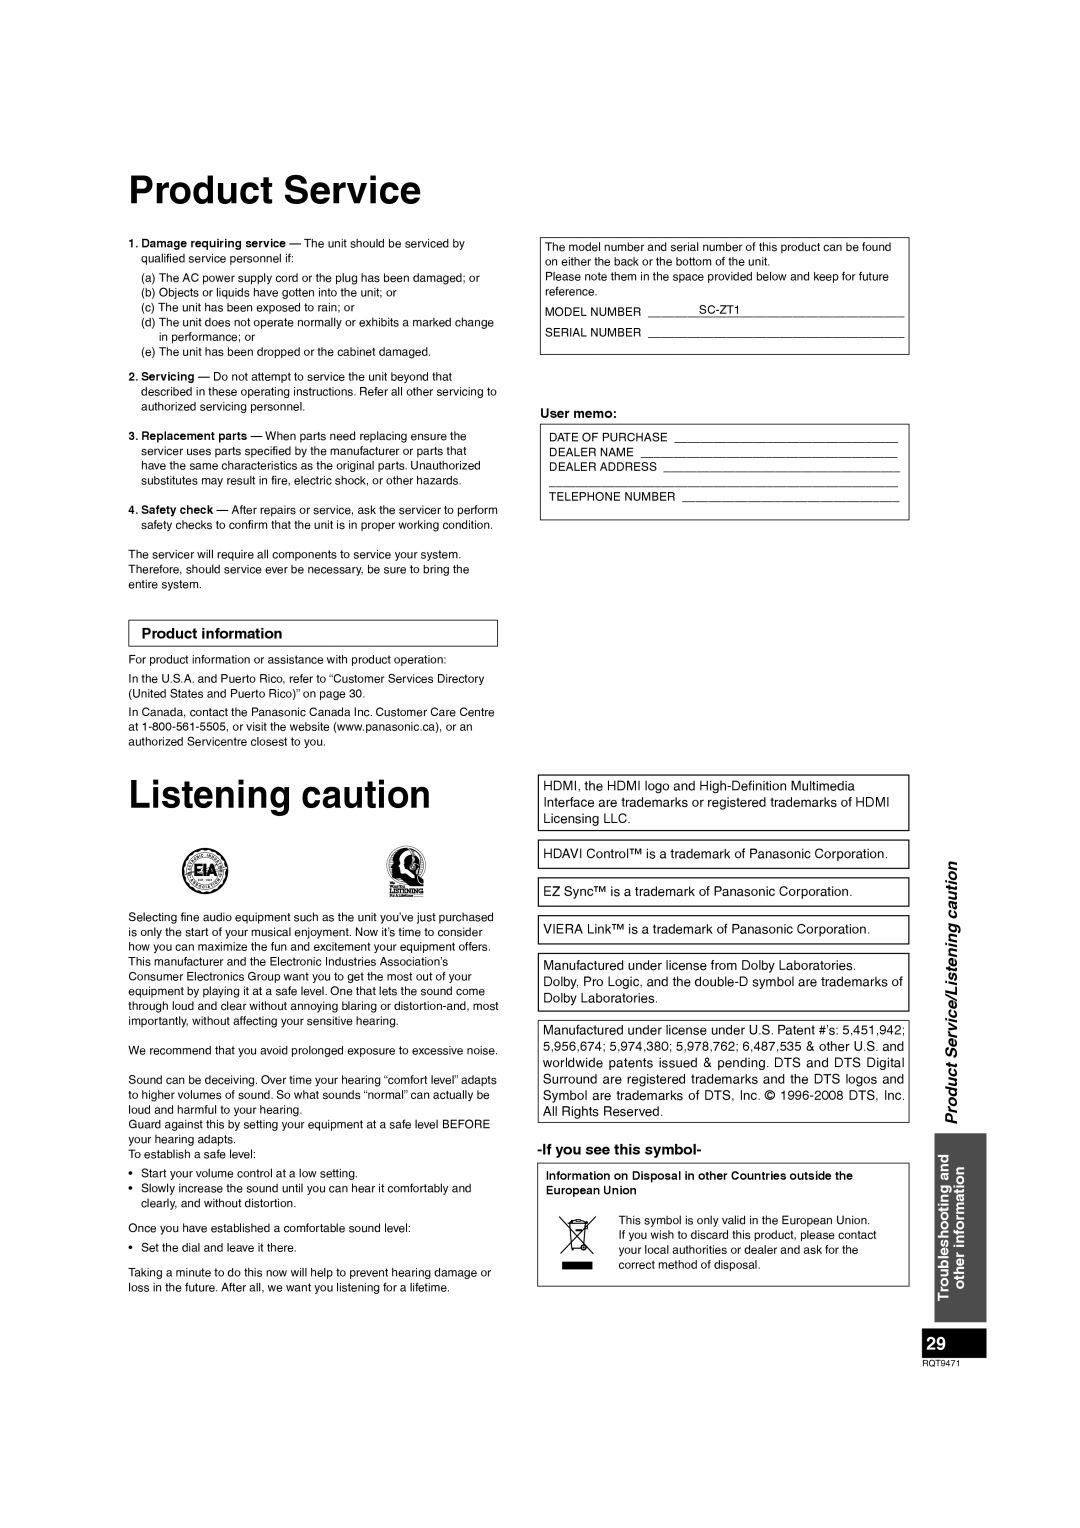 Panasonic SC-ZT1 warranty Product Service, Listening caution, Product information, Ifyou see this symbol 